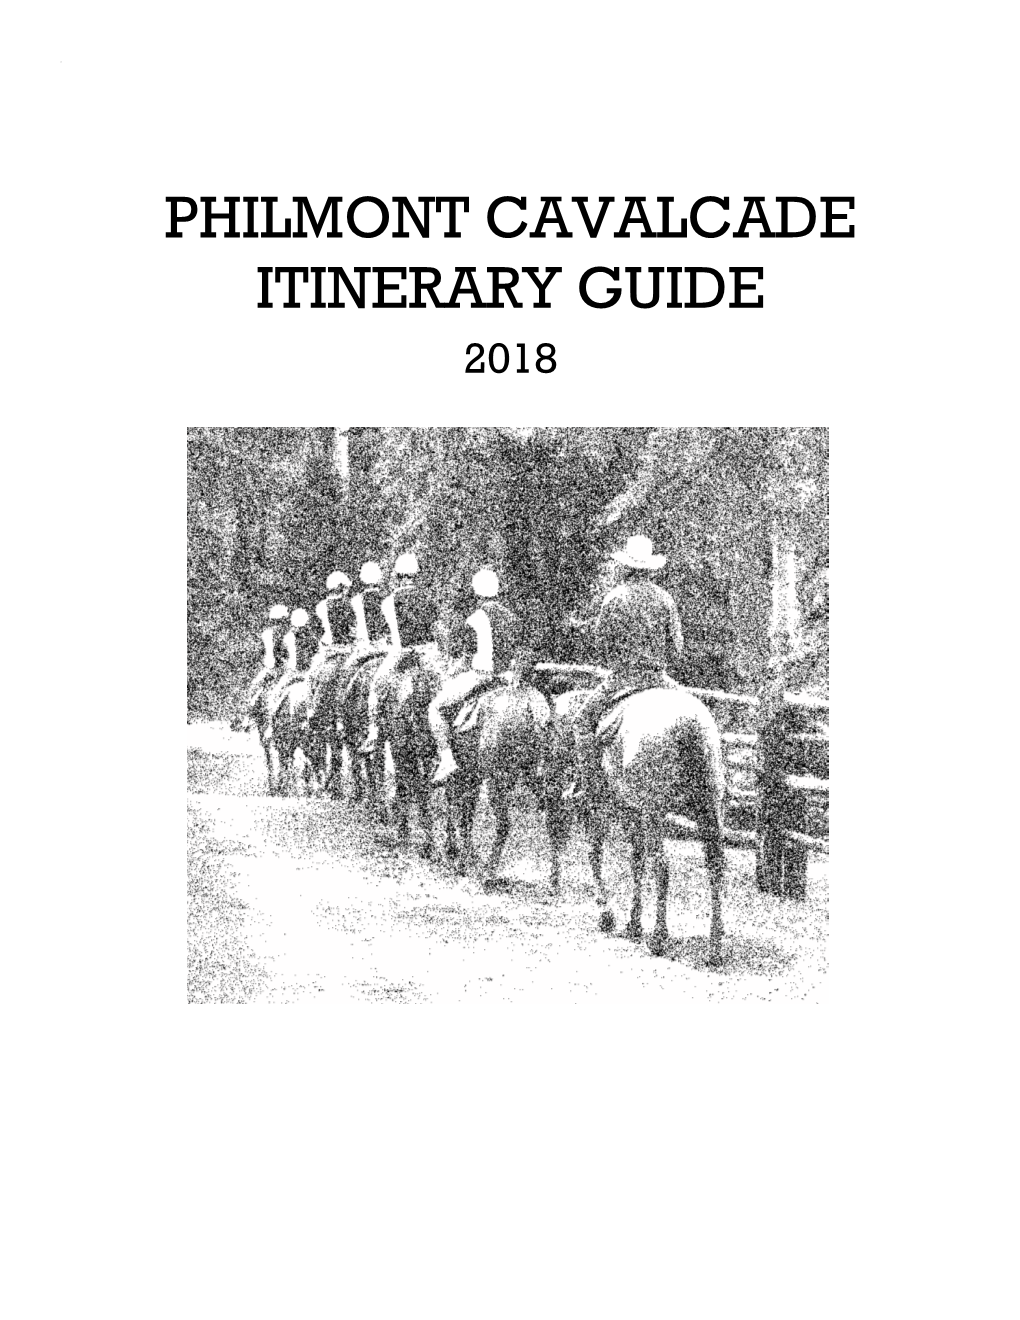 Philmont Cavalcade Itinerary Guide 2018